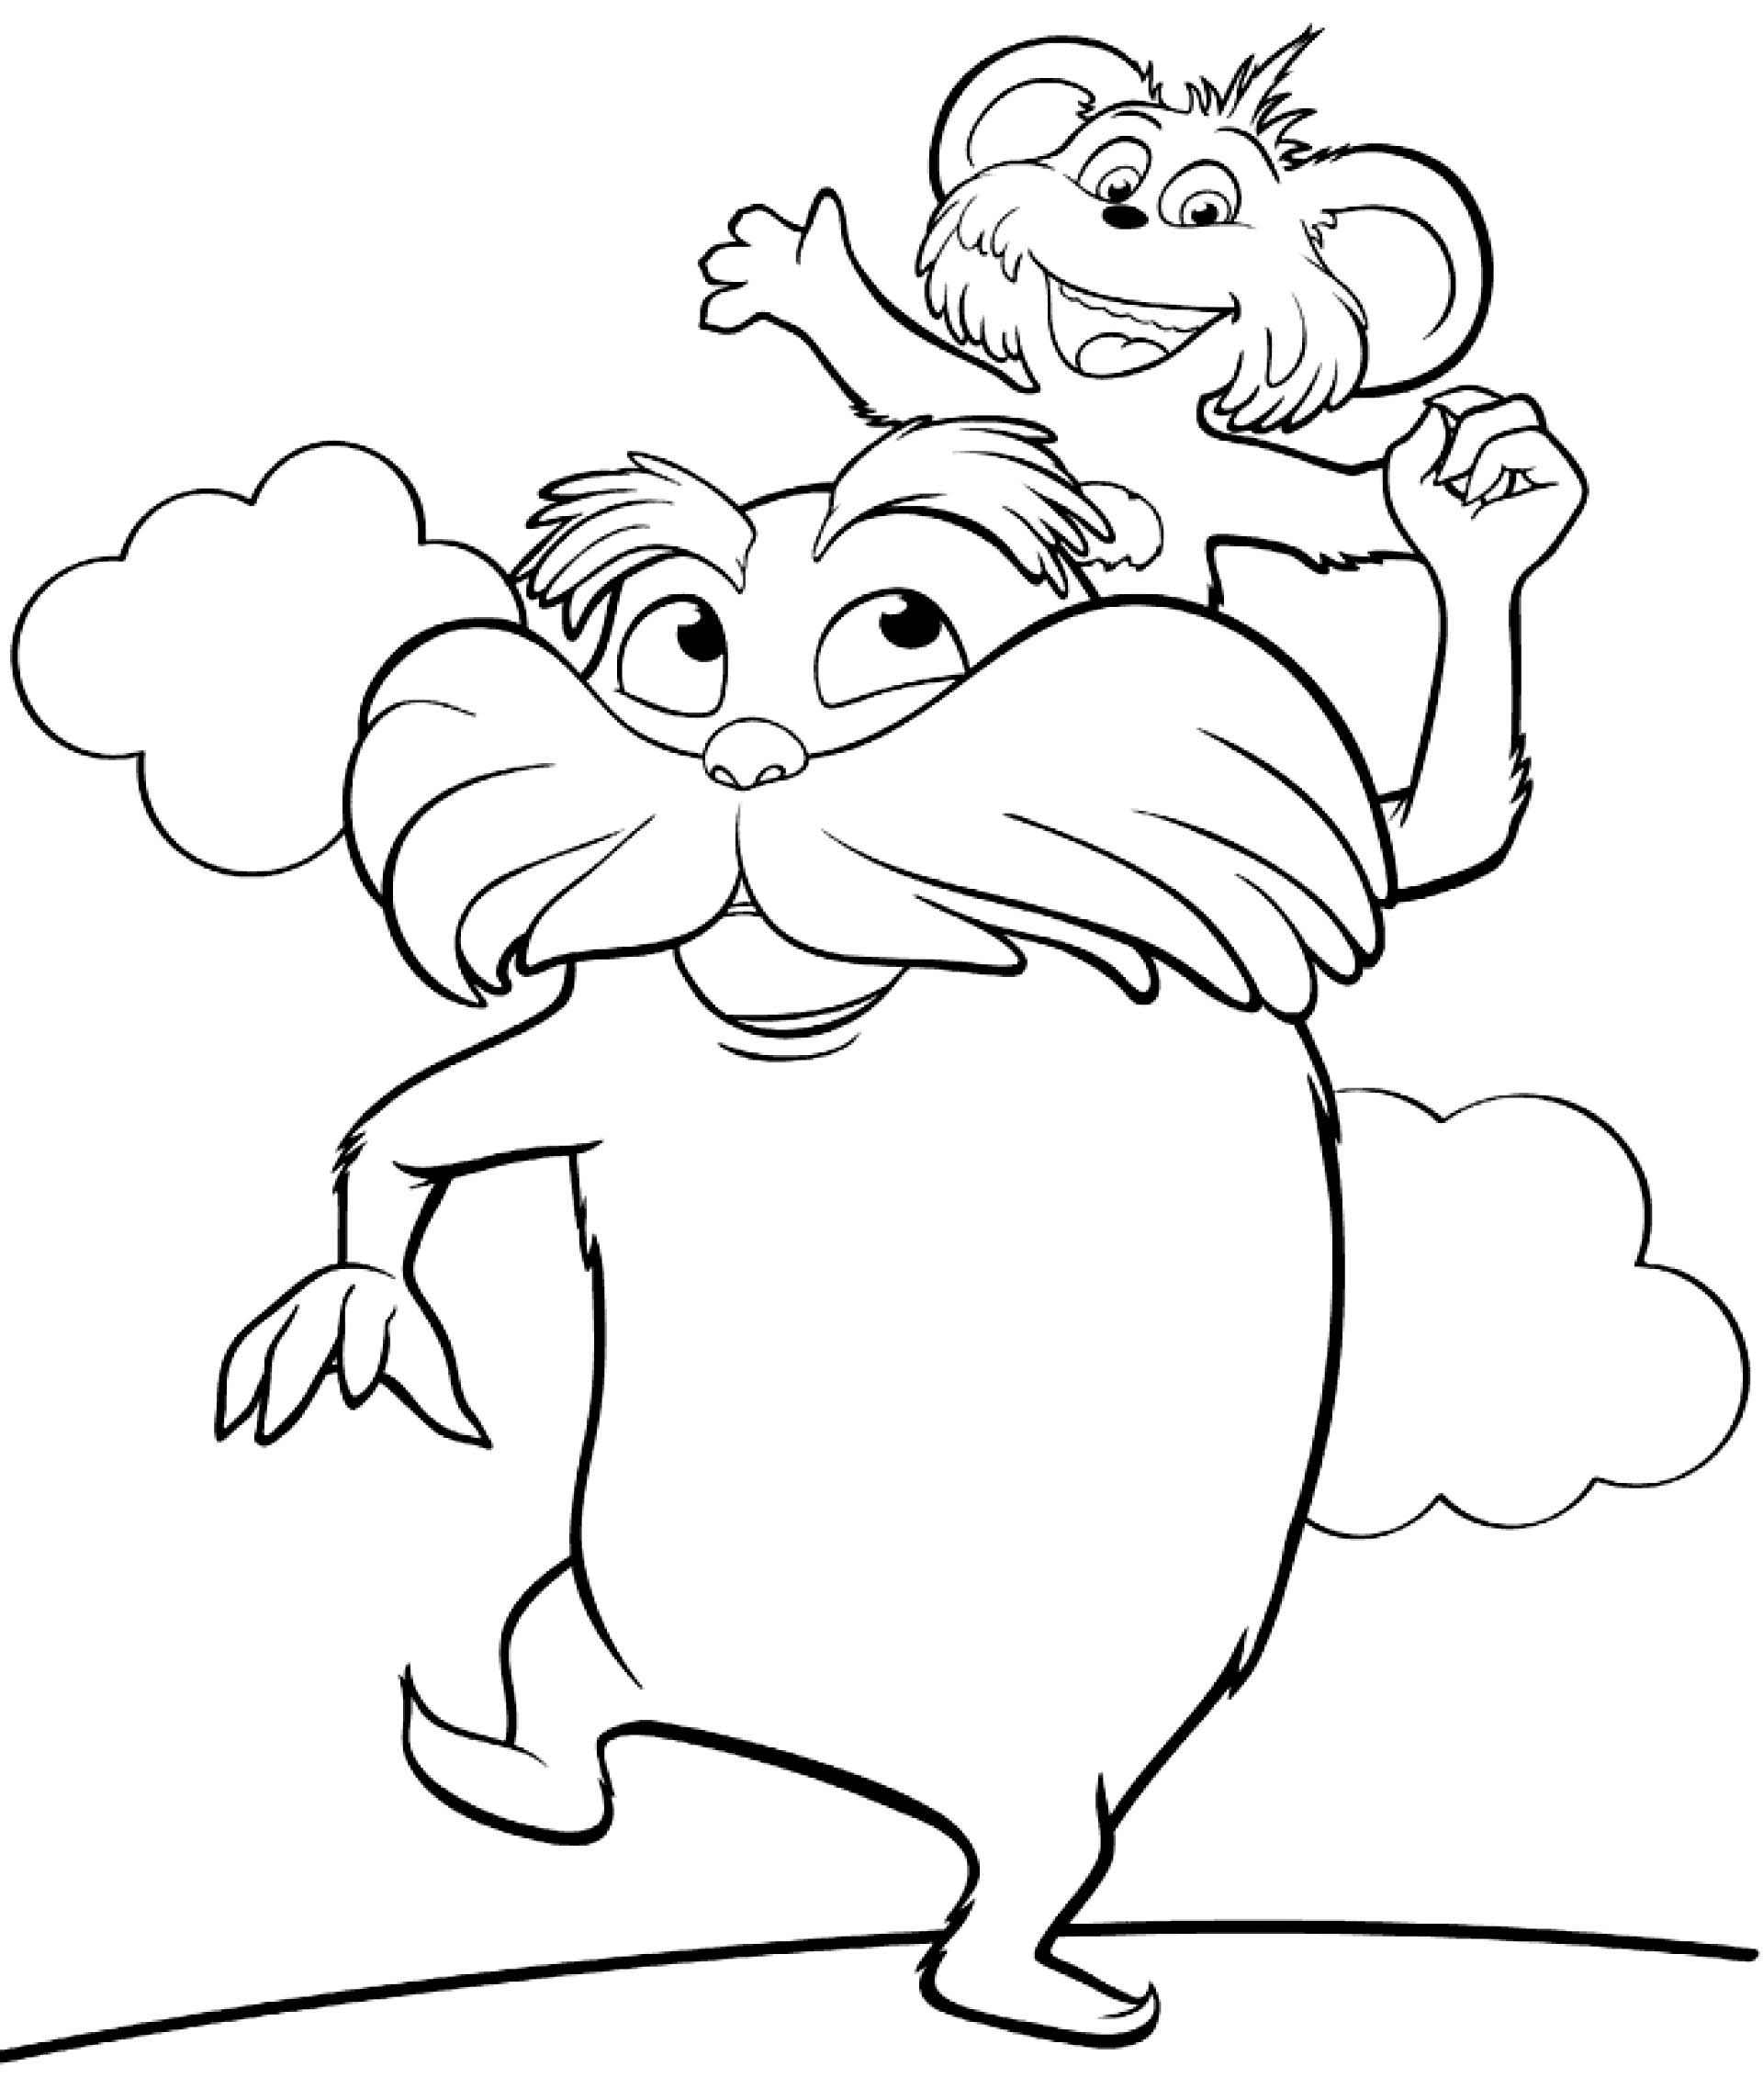 Lorax characters clipart